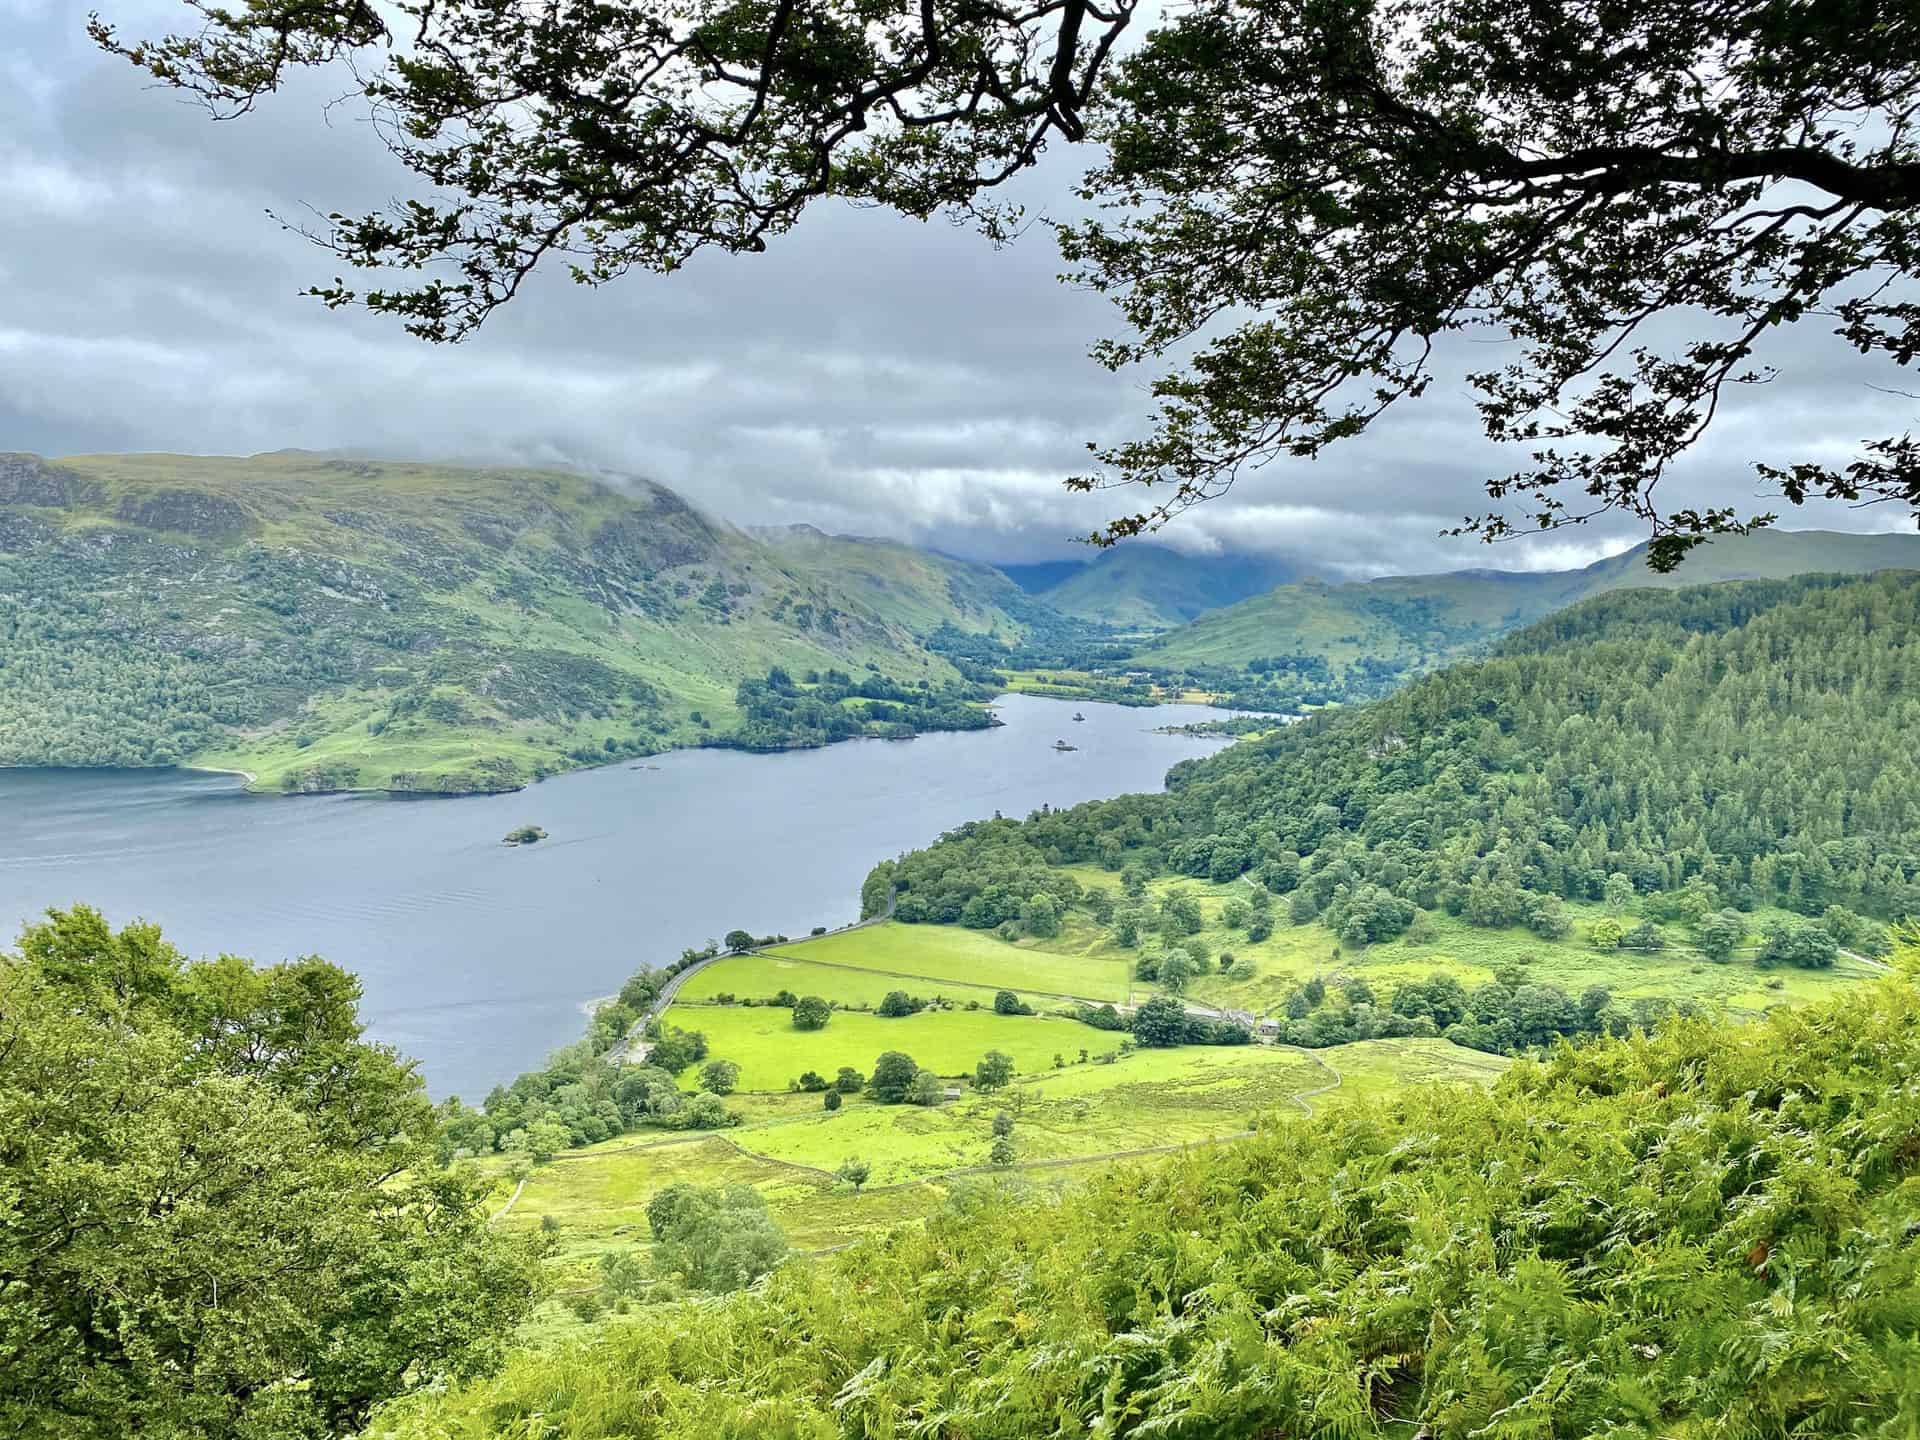 Looking down into the Glencoyne valley from the steep slopes of Glencoyne Brow. In the distance Ullswater reaches its southernmost extent at Patterdale.